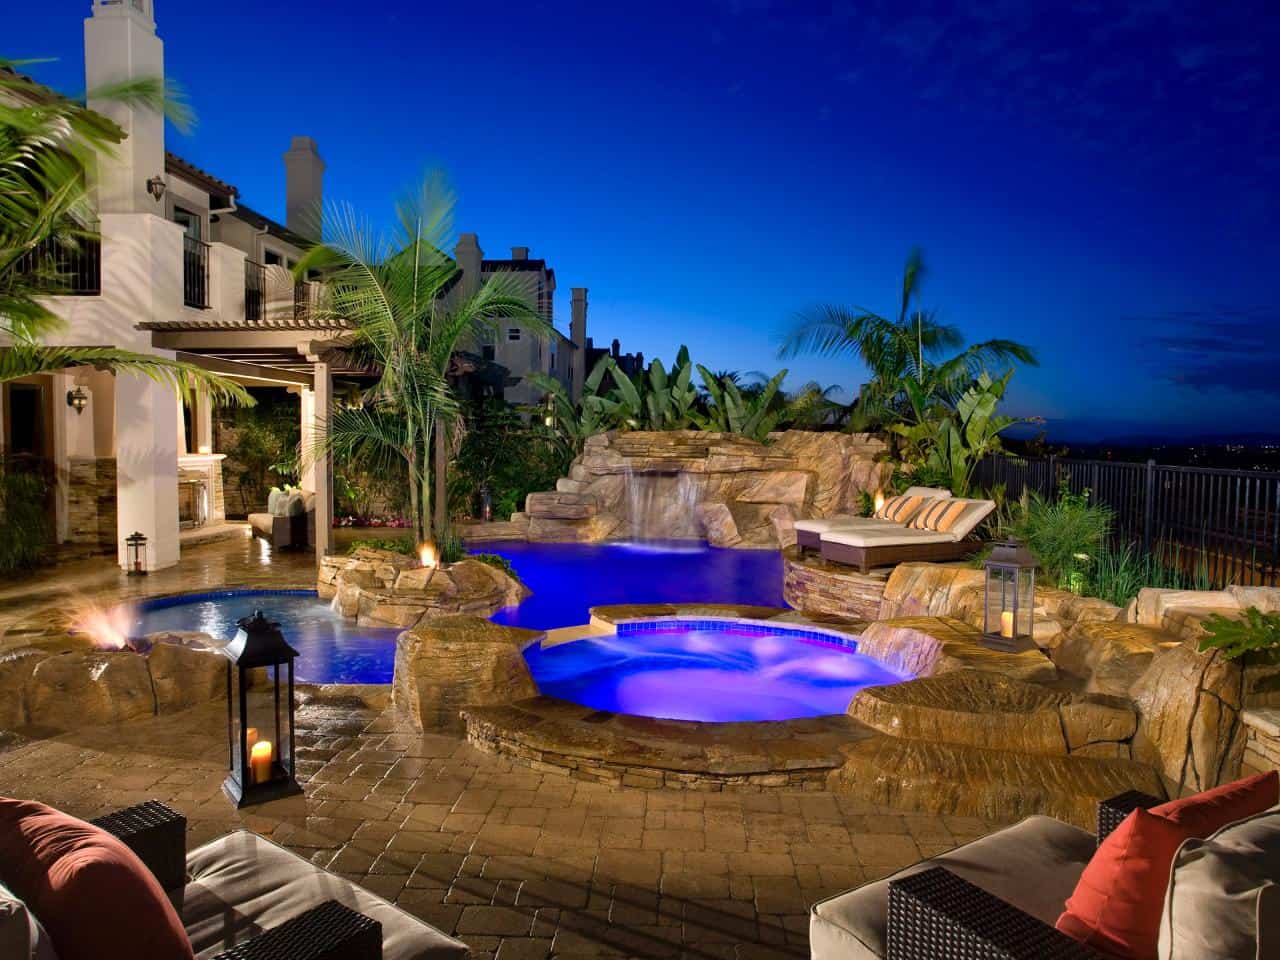 Creating a multi-leveled pool will give you the getaway you desire right in your backyard.